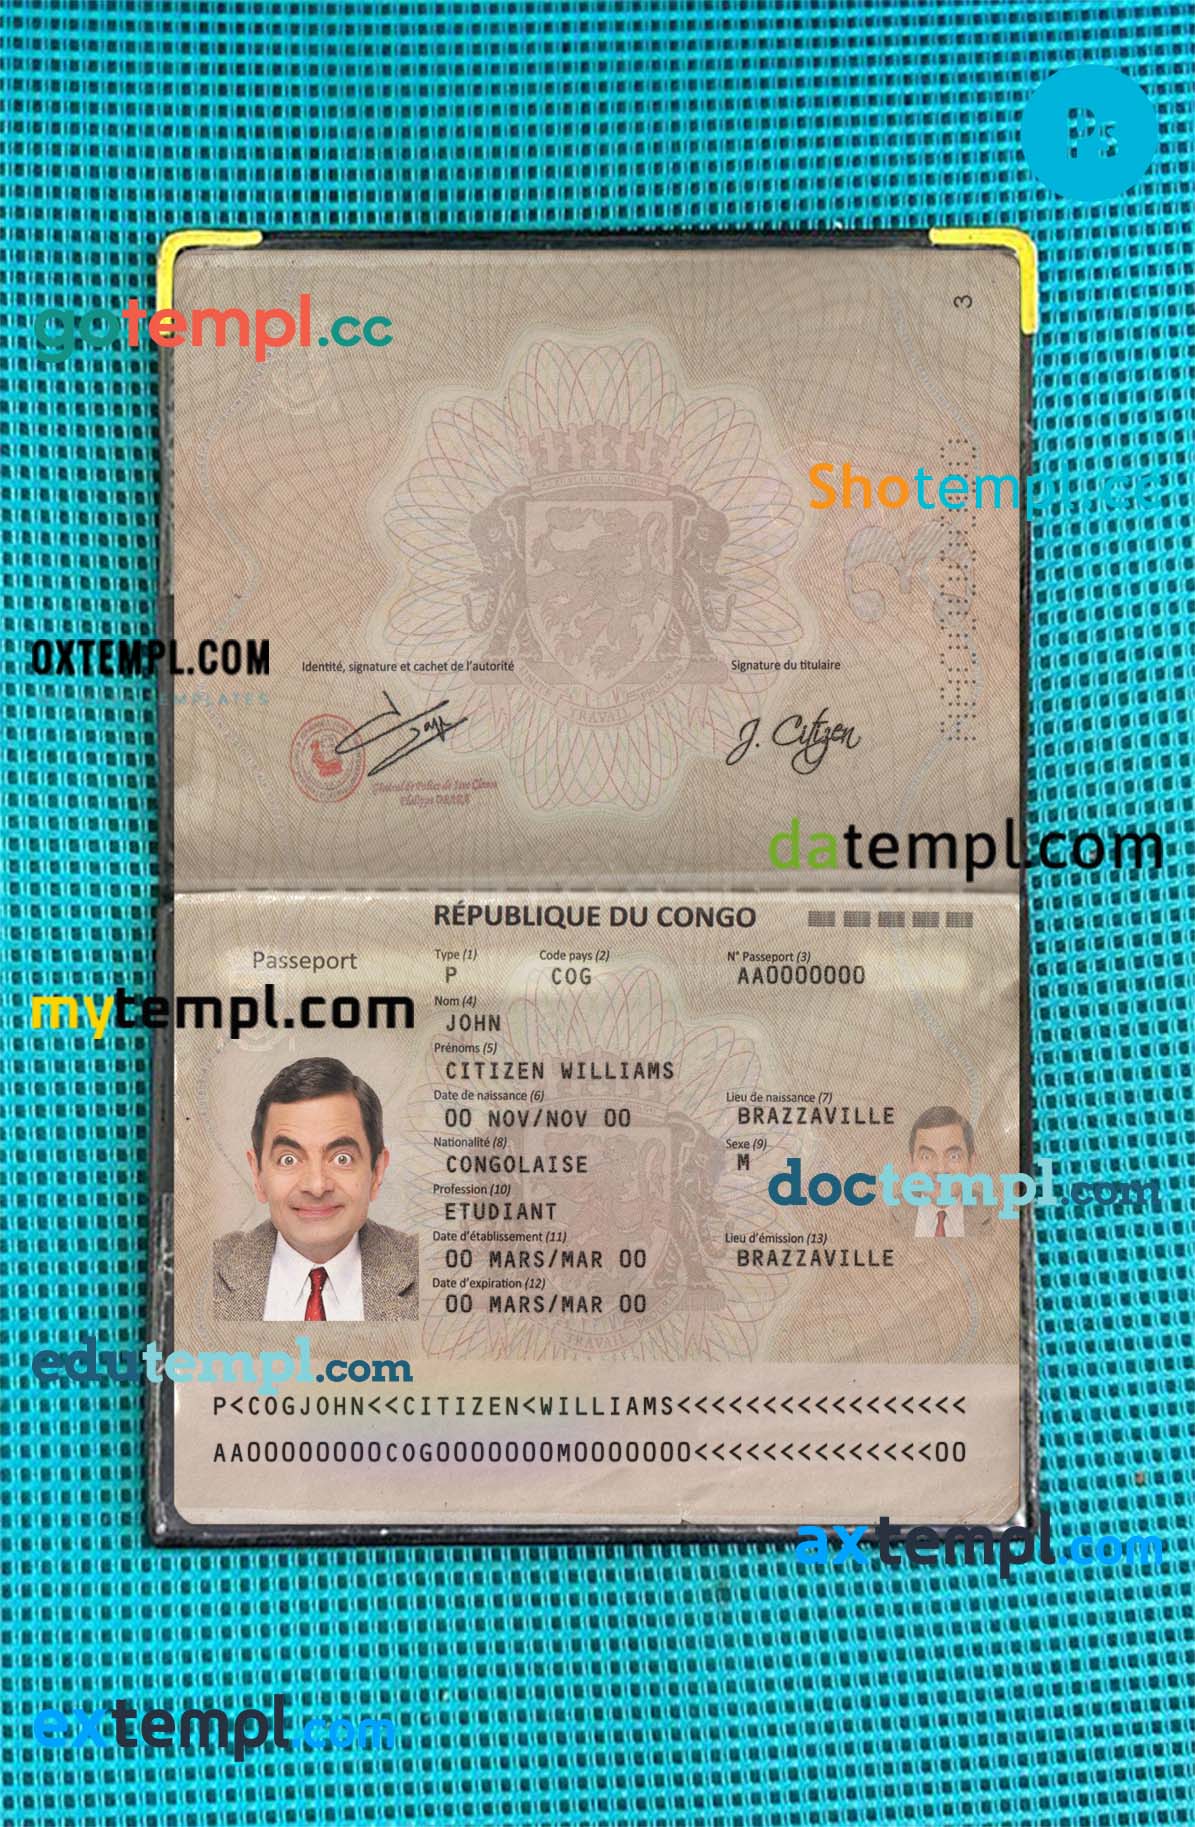 Australia Queensland state driving license PSD files, scan look and photographed image, 2 in 1